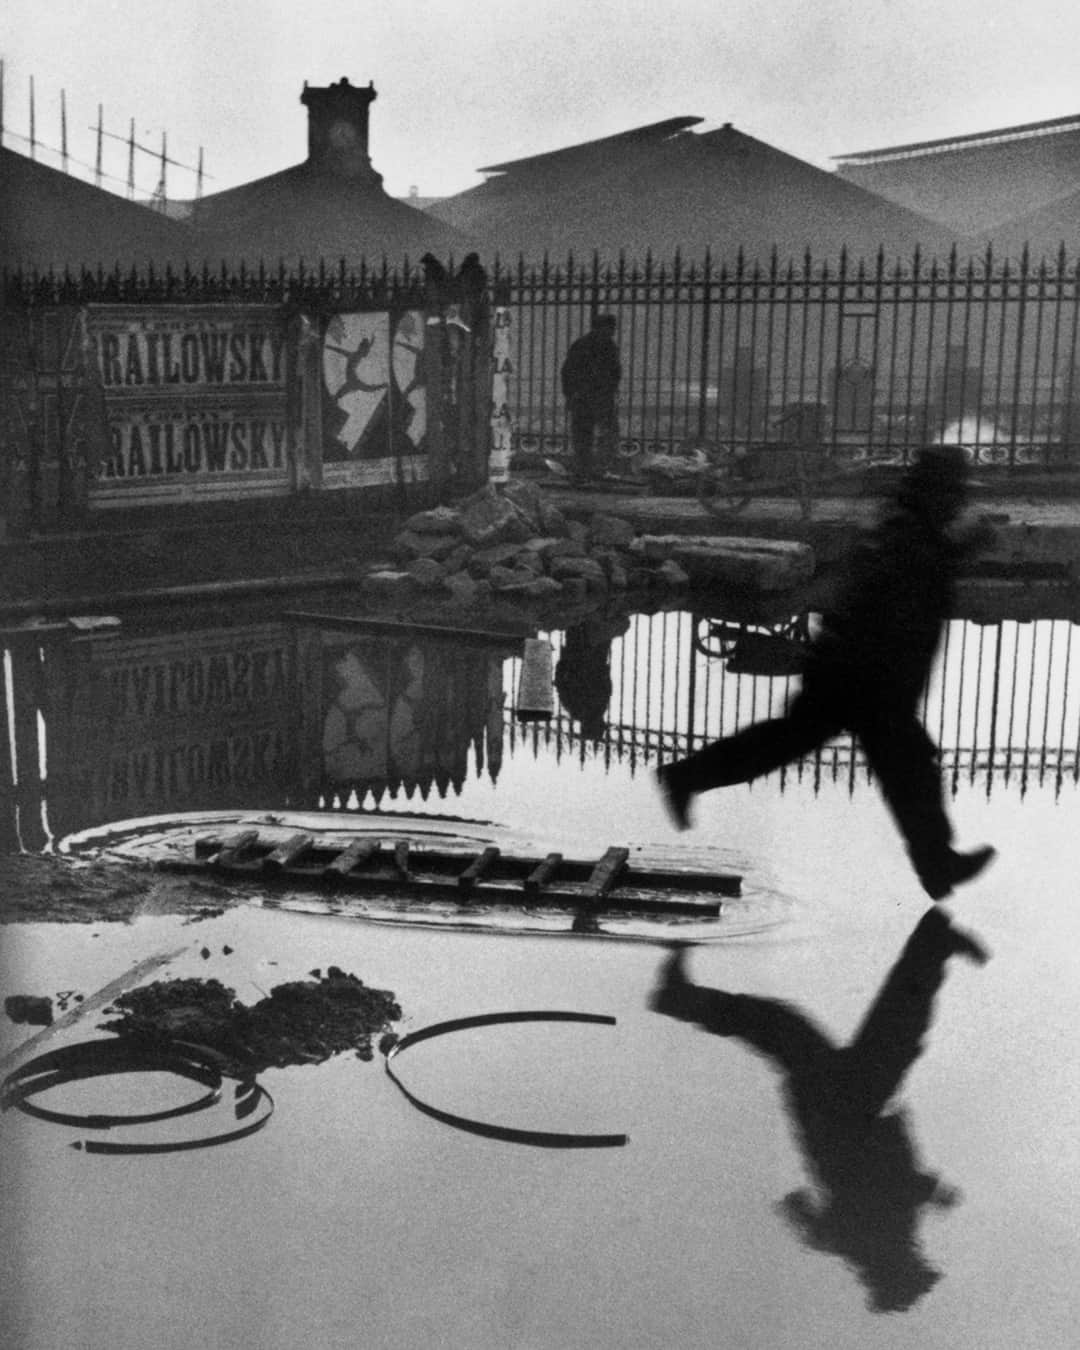 Magnum Photosのインスタグラム：「The Decisive Moment 💥  Mythological in its magnitude, the decisive moment was a signature tenet of Henri Cartier-Bresson’s (@fondationhcb) work, yet its essence cannot be truly defined. Emphasizing the coalescence of form, visual harmony and significance of events in time, its influence has prevailed through generations of Magnum photographers.  Taken over 90 years ago, Cartier-Bresson’s capture of a man jumping over a puddle laid a new foundation in photographic perspective, giving prominence to his instinctive image-making approach.  In an image from Trent Parke’s (@chillioctopus) photobook Monument, where light battles dark in a dystopian vision of mankind, a line of city dwellers stand eclipsed by shadows from another plane.  A Sevillan dancer’s skirt whirls fluidly across the frame in a demonstration of form in motion, taken by Inge Morath in 1987.  Two images featured in this selection will be available to purchase as signed or estate-stamped 6x6" prints in the upcoming Square Print Sale, in partnership with @worldpressphoto, launching on Monday, October 16.   Comment your favorite👇  PHOTOS (left to right):  (1) Saint Lazare station. Place de l’Europe. Paris, France. 1932. © Fondation Henri Cartier-Bresson (@fondationhcb) / Magnum Photos  (2) Sydney, New South Wales, Australia. 2003. © Trent Parke (@chillioctopus) / Magnum Photos  (3) The Leaning Tower of Pisa. Pisa, Italy. 1990. © @martinparrstudio / Magnum Photos  (4) Pool designed by Alain Capeilleres. Town of Le Brusc. Provence, France. 1976. © Martine Franck / Magnum Photos  (5) Every Sunday at dawn, priests of the Zion Church take their newly converted congregation to the sea to be baptized through immersion. Cape Town, South Africa. 1999. © @abbas.photos / Magnum Photos  (6) Nuevo Laredo, Tamaulipas, Mexico. 1996. © Alex Webb (@webb_norriswebb) / Magnum Photos  (7) Trafalgar Square, London, England. 1958. © @sergiolarrain / Magnum Photos  (8) Dancer's skirt. Feria in Sevilla. Spain. 1987. © Inge Morath / Magnum Photos  (9) Las Vegas airport, Nevada. USA. 1982. © @harry_gruyaert / Magnum Photos  (10) The strengths of the soul. Puente Genil, Spain. 1976. © Cristina García Rodero / Magnum Photos」